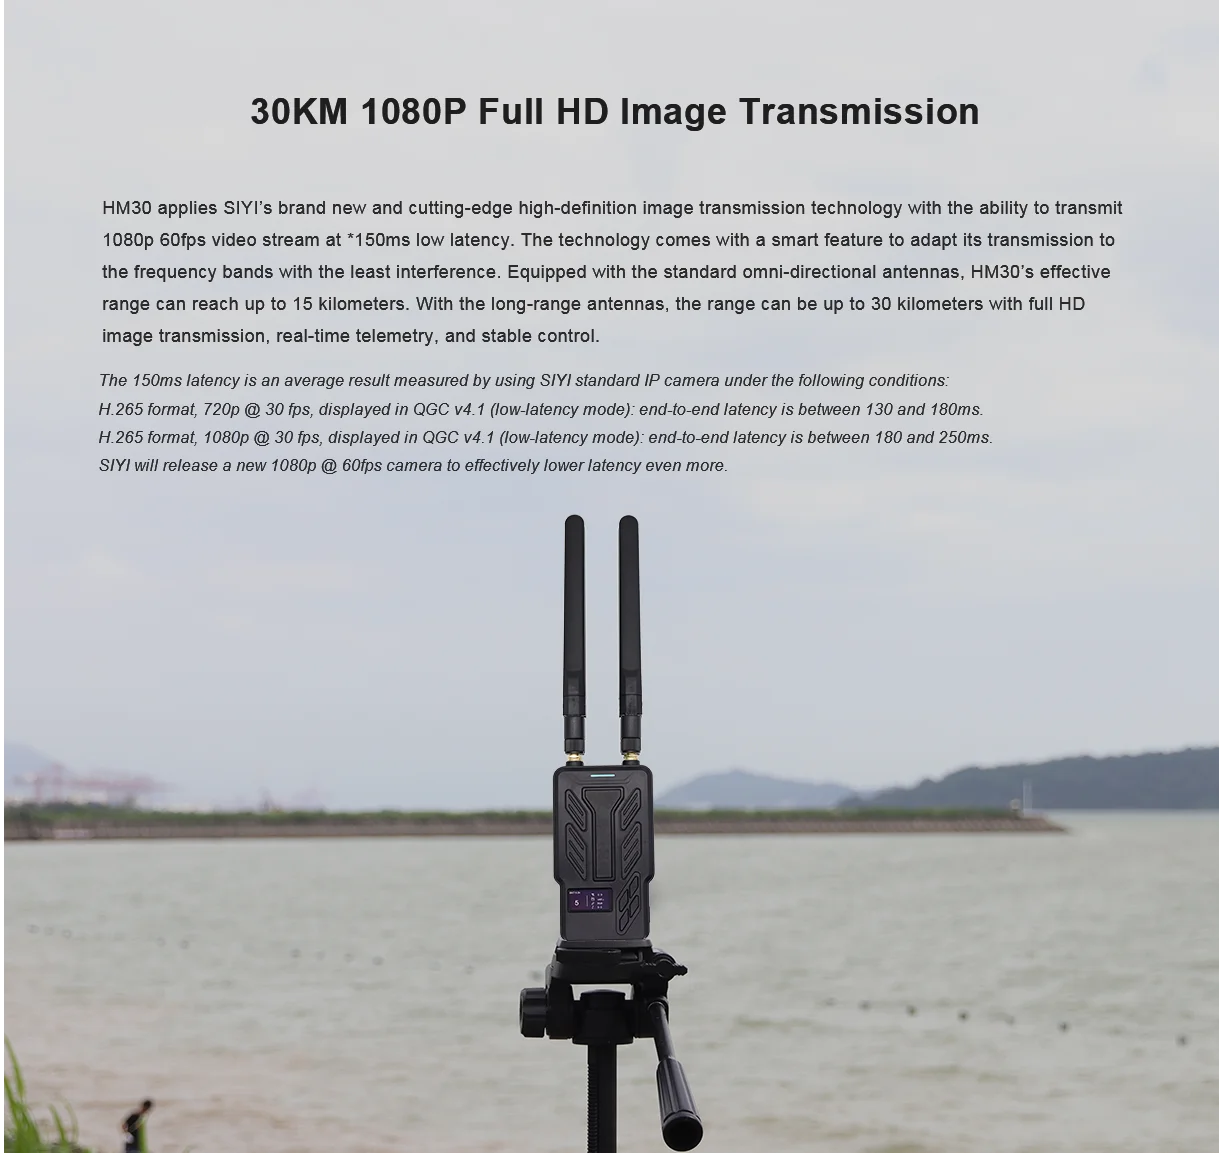 SIYI HM30 Transmitter, HM3O's effective range can reach up to 15 kilometers with the long-range